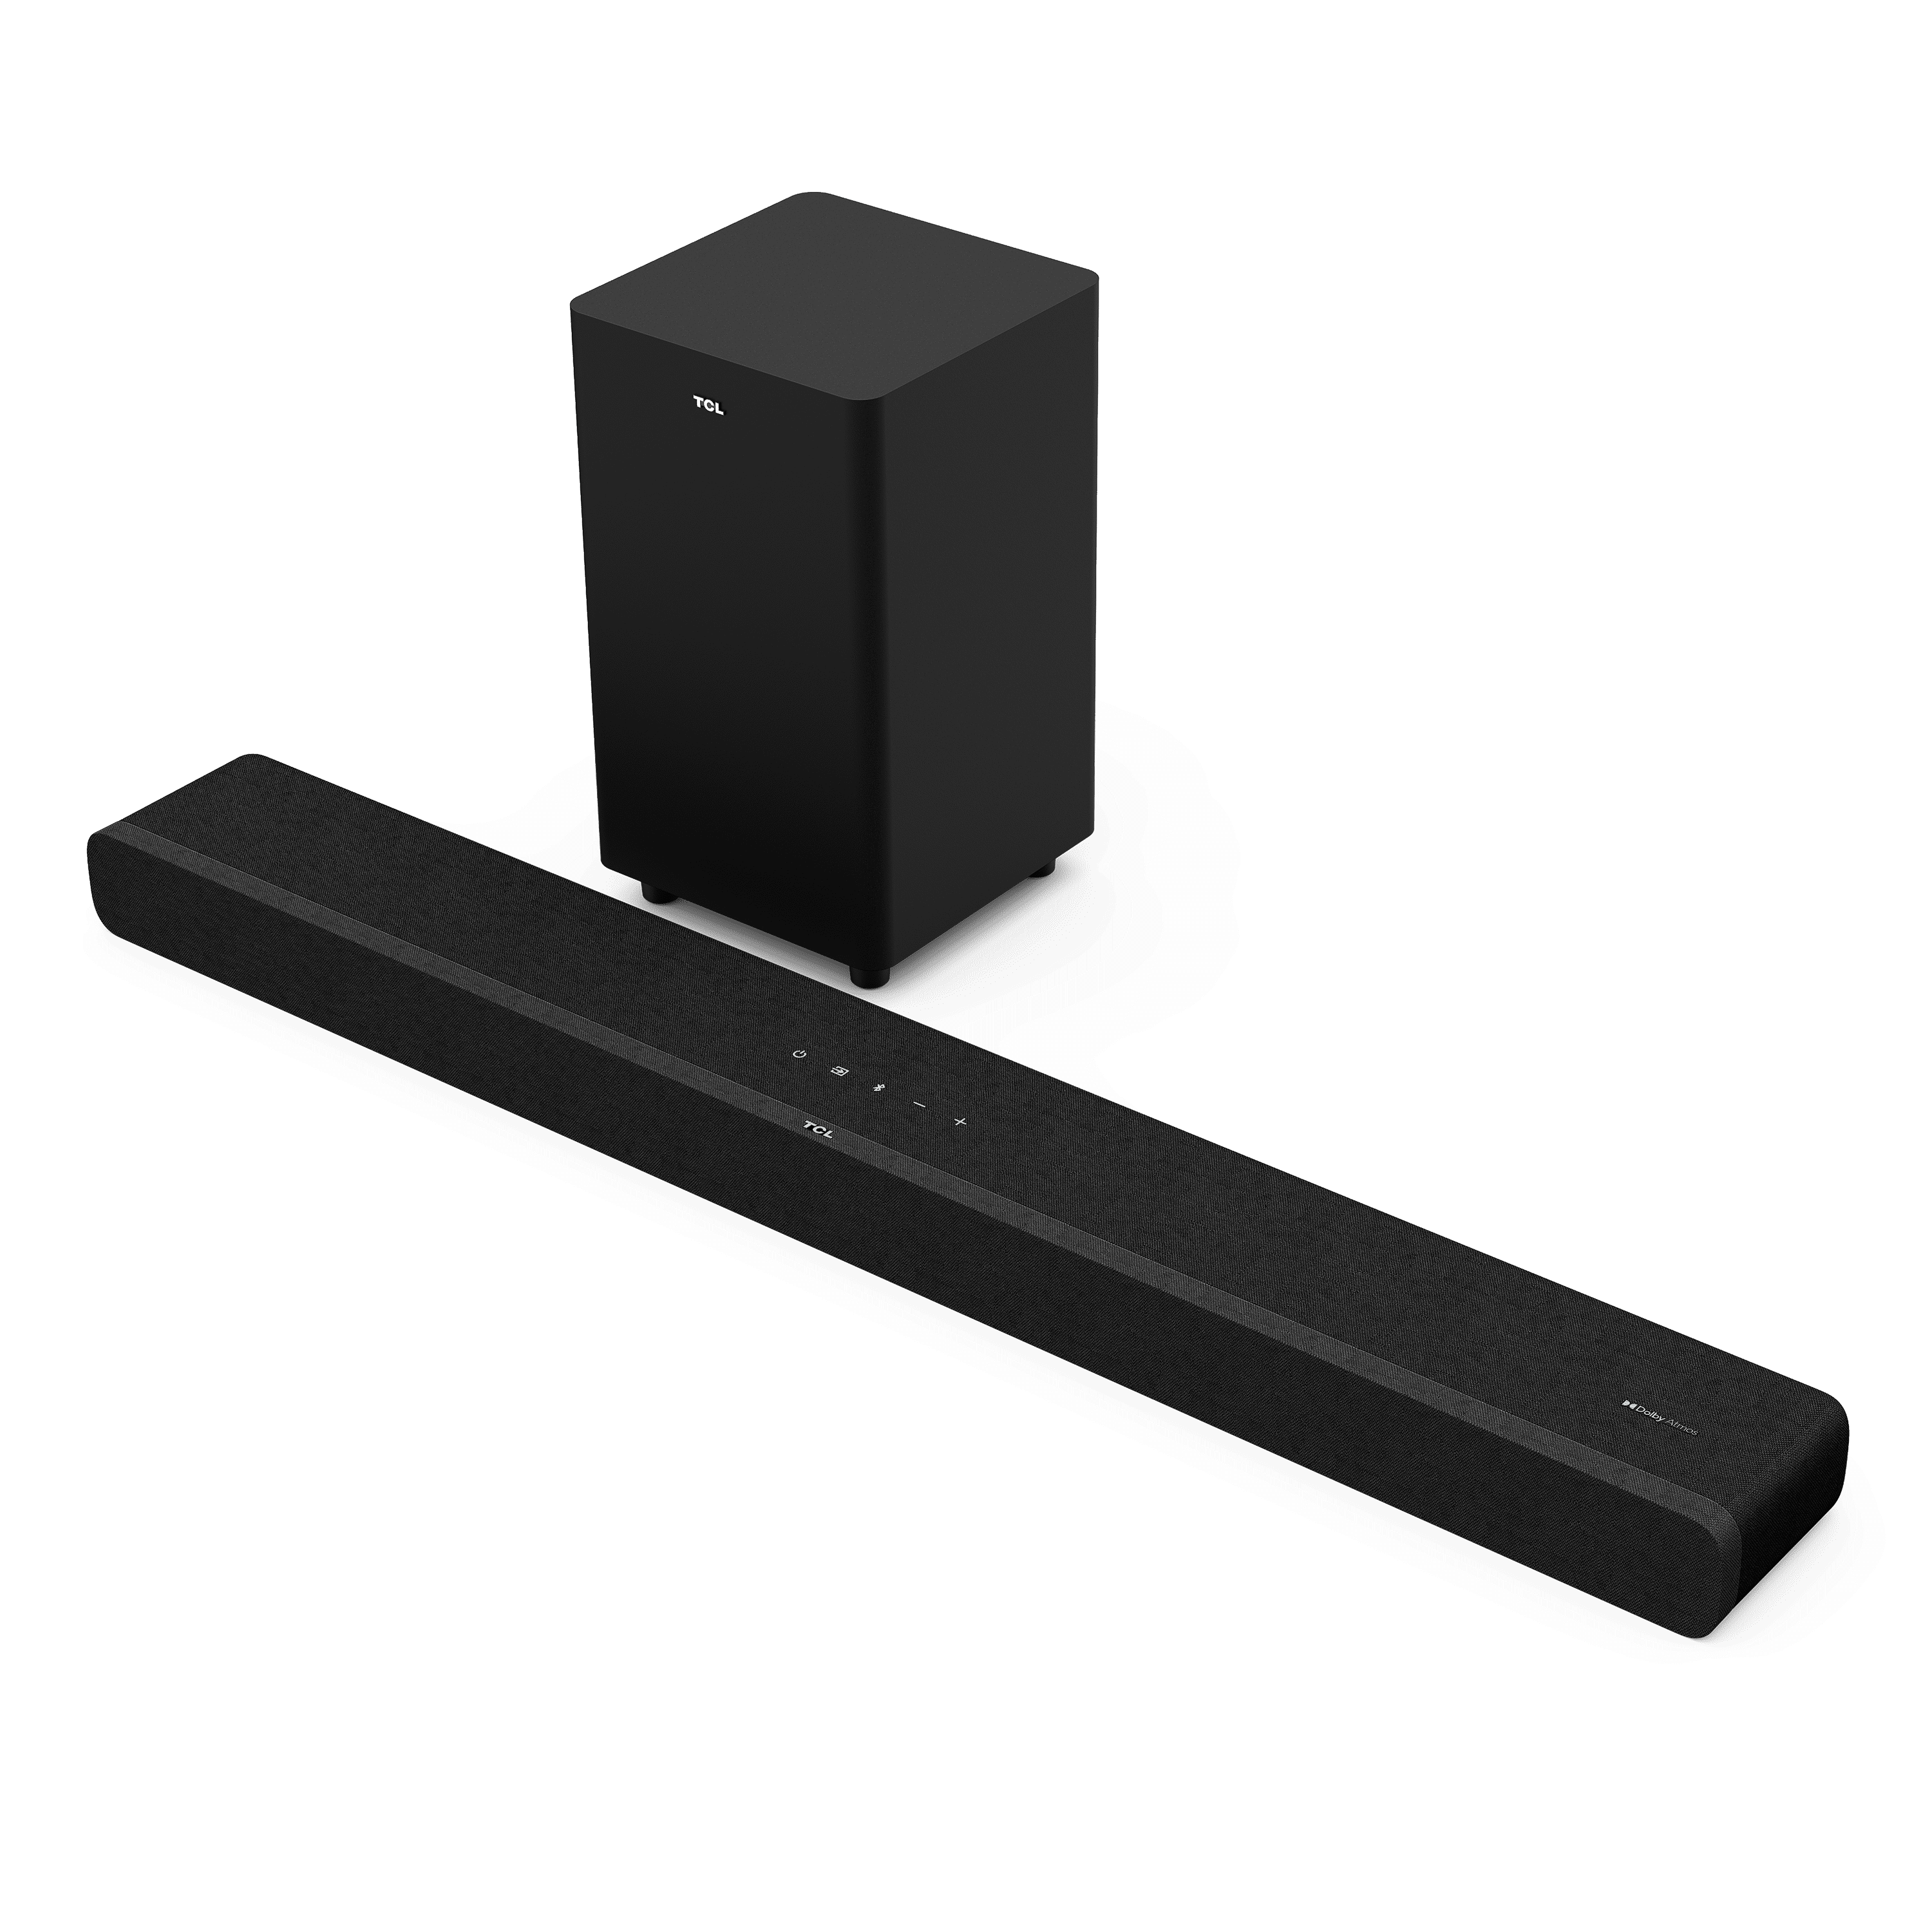 TCL Alto 8+ Dolby Atmos 3.1.2 Channel Sound bar with wireless Subwoofer, TS813 - Walmart.com $168